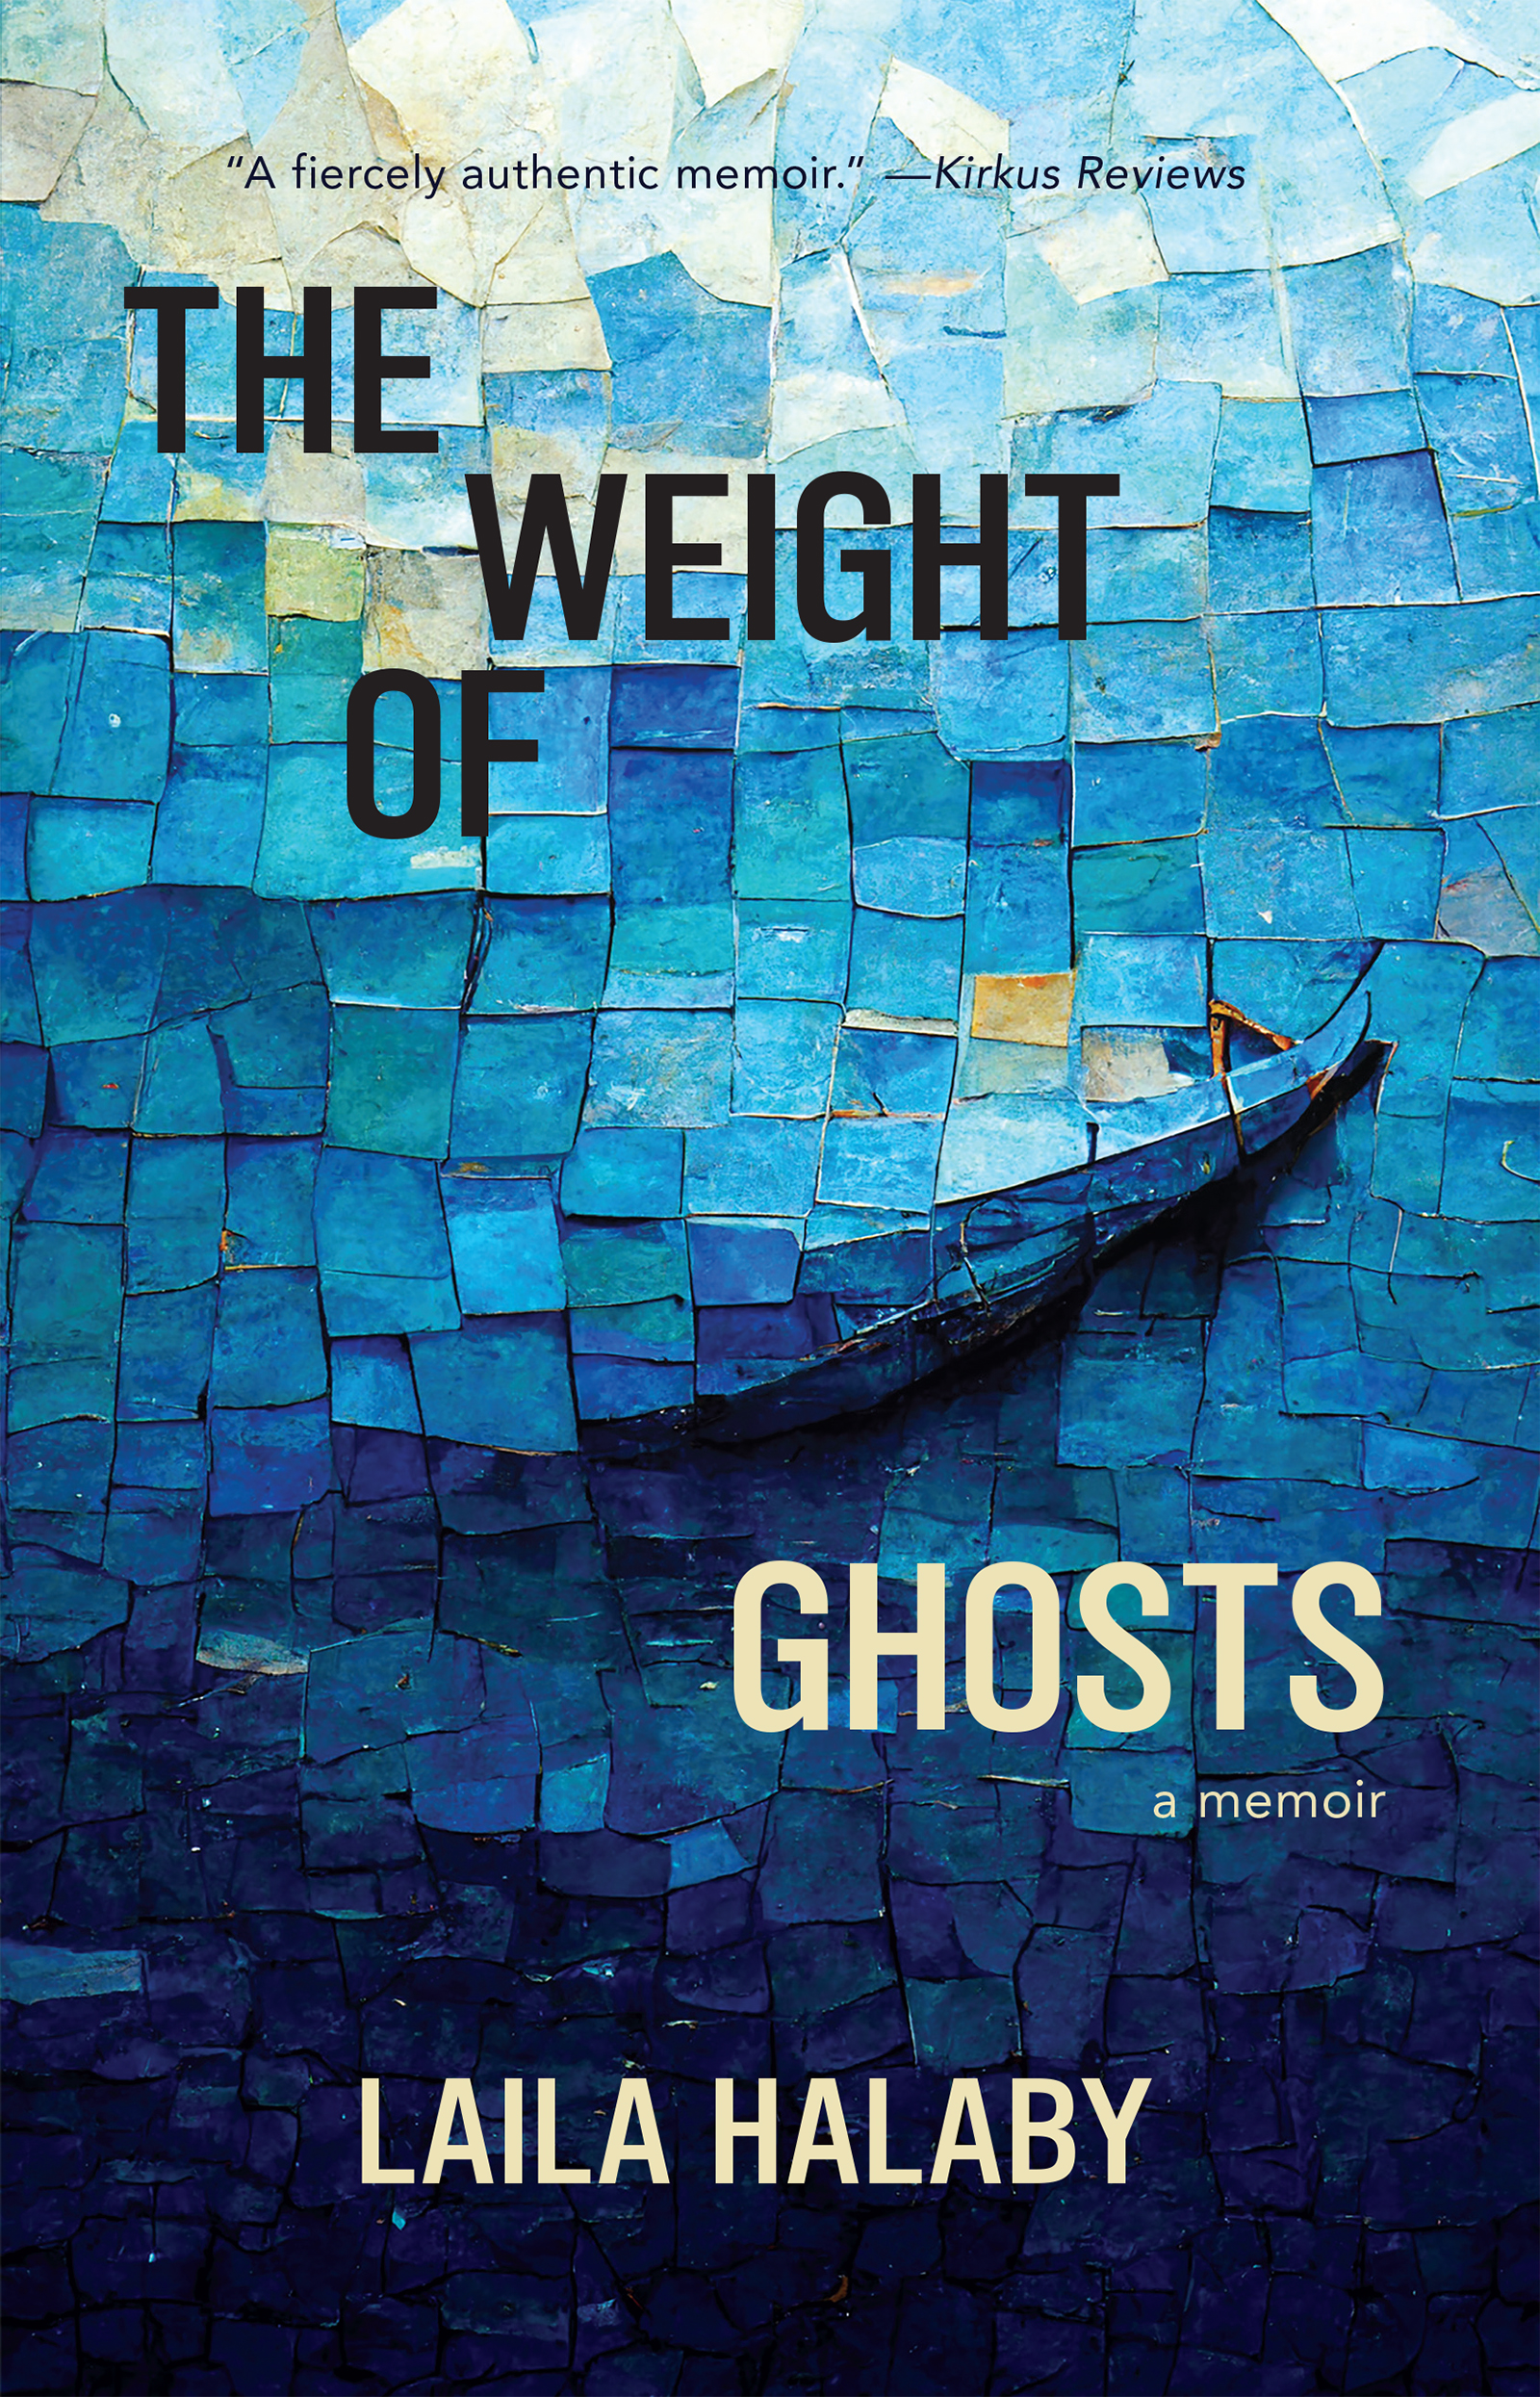 The Weight of Ghosts